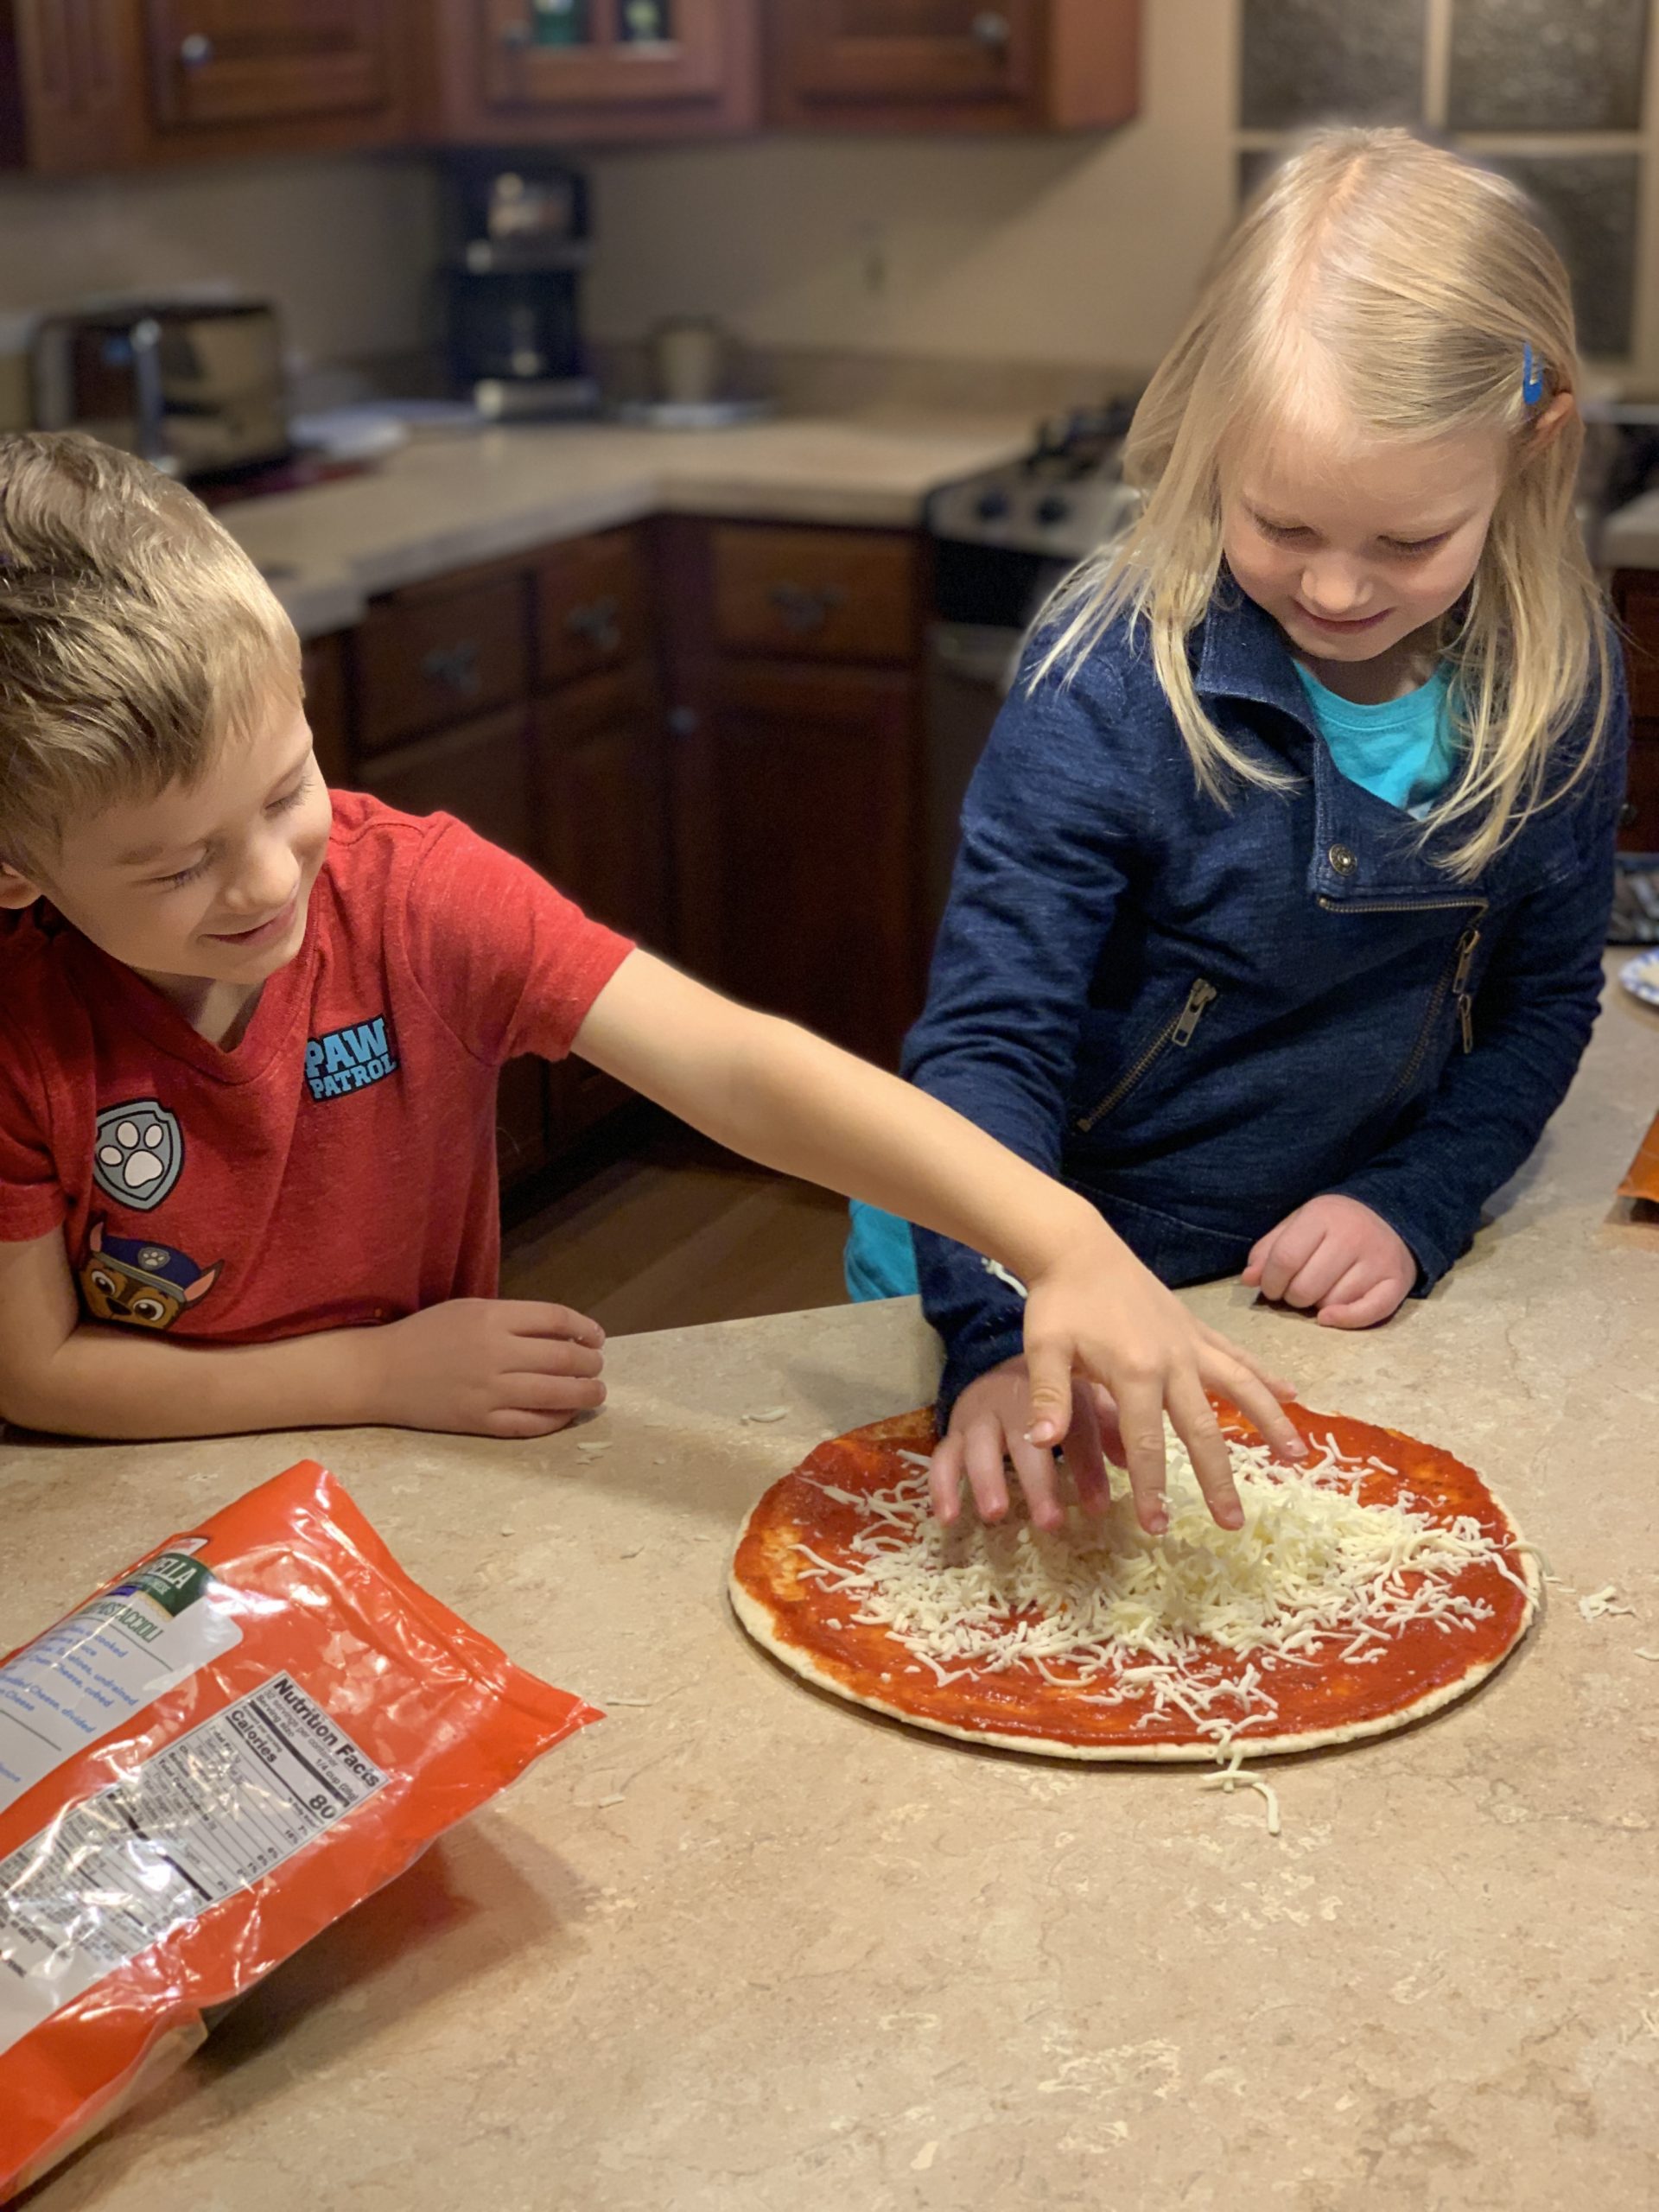 Kids making pizza with Crustology